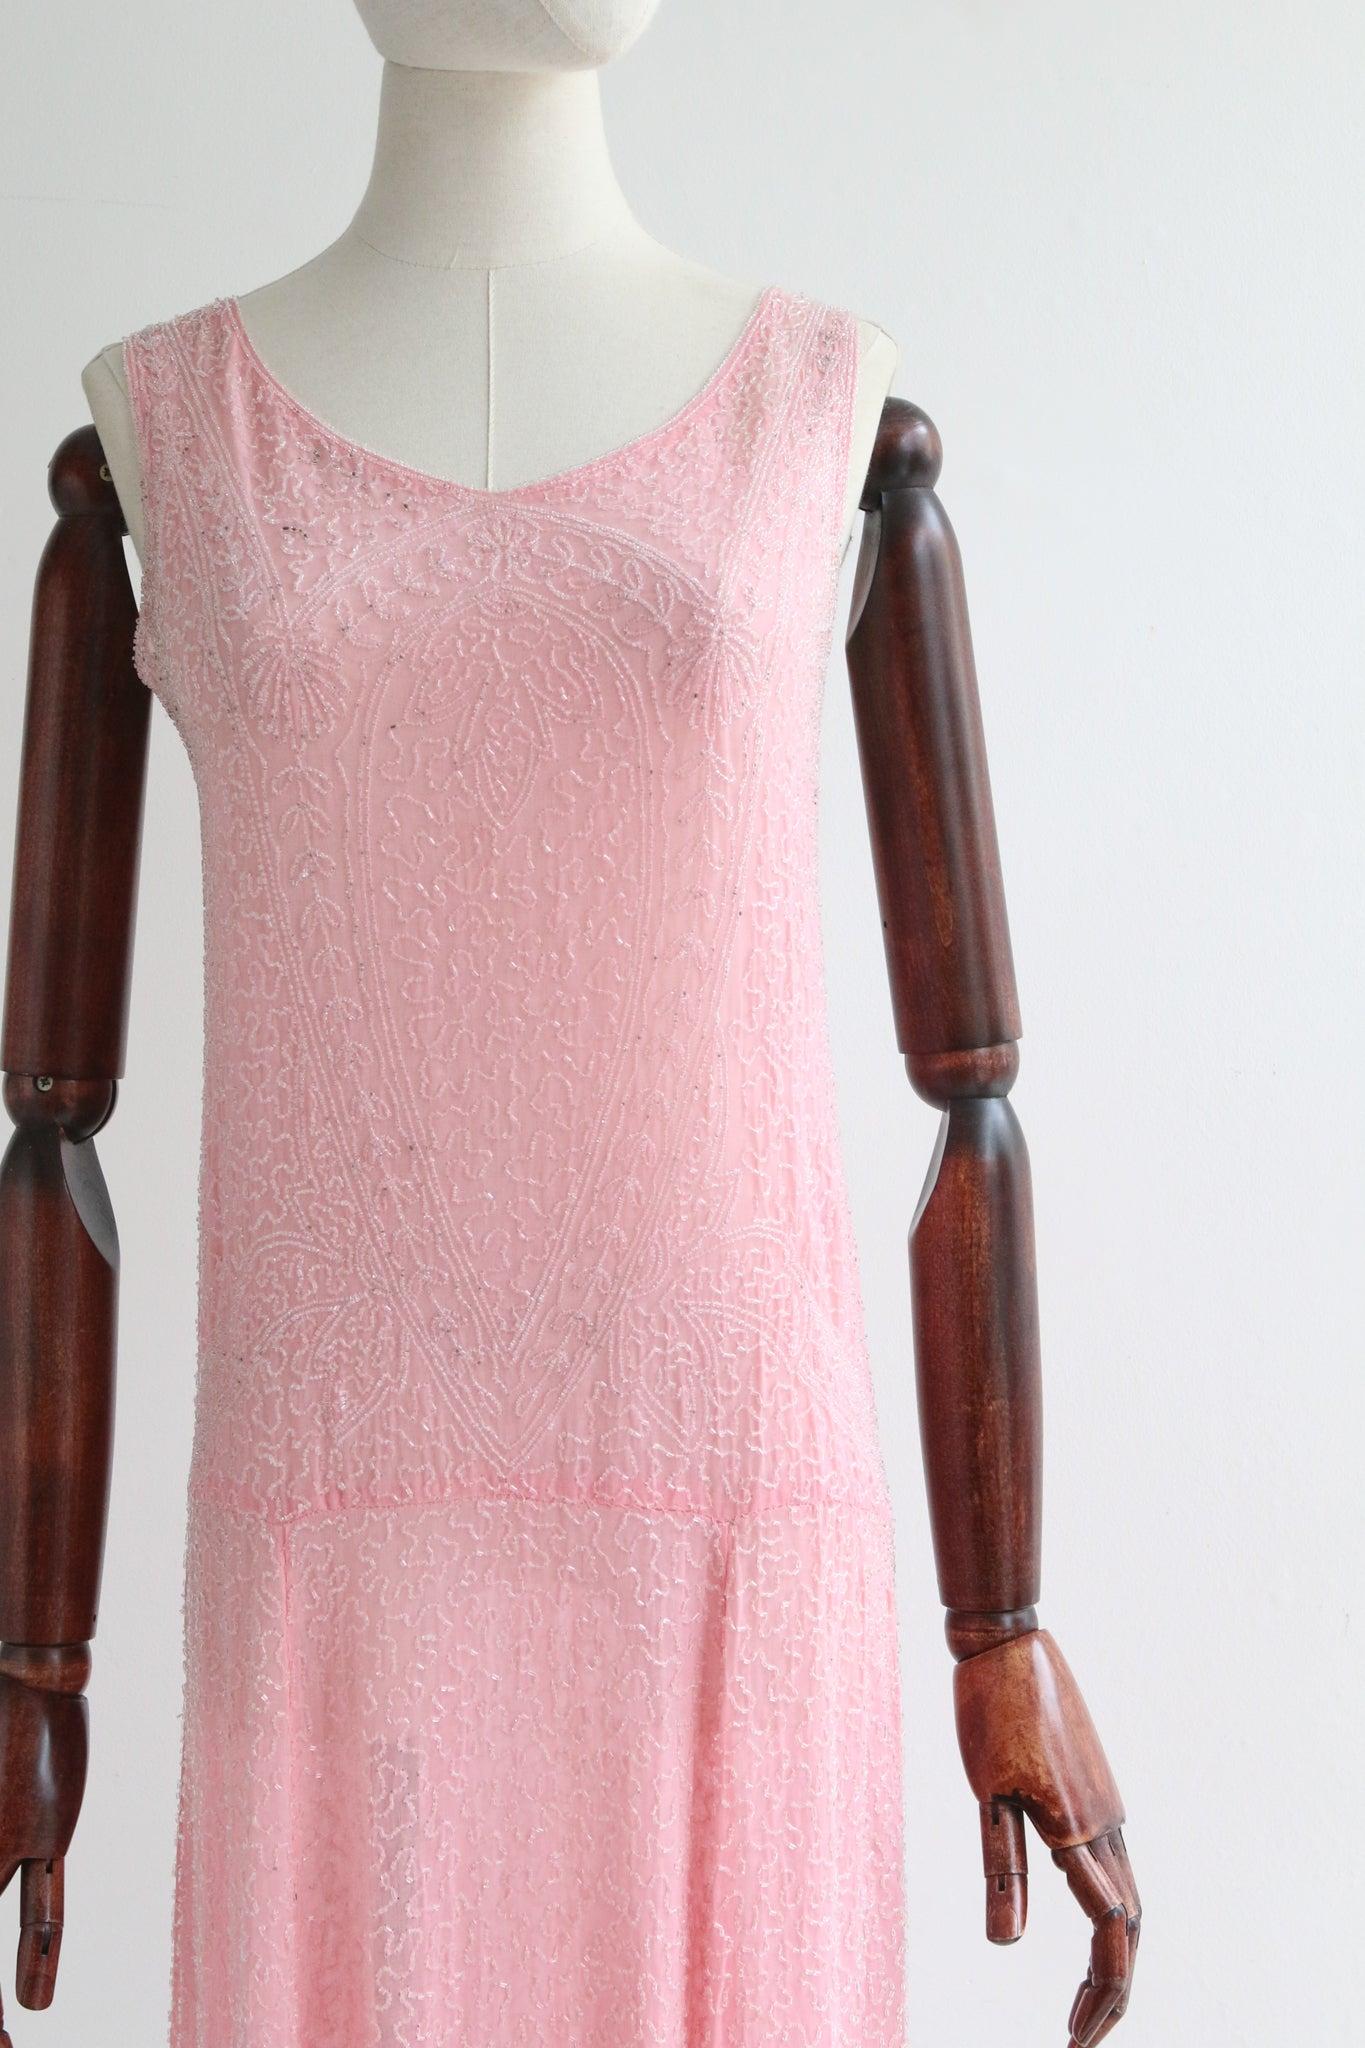 Vintage 1920's Beaded Dress Pink Cotton Voile Glass Beaded Fringed Dress UK 8-10 In Good Condition For Sale In Cheltenham, GB